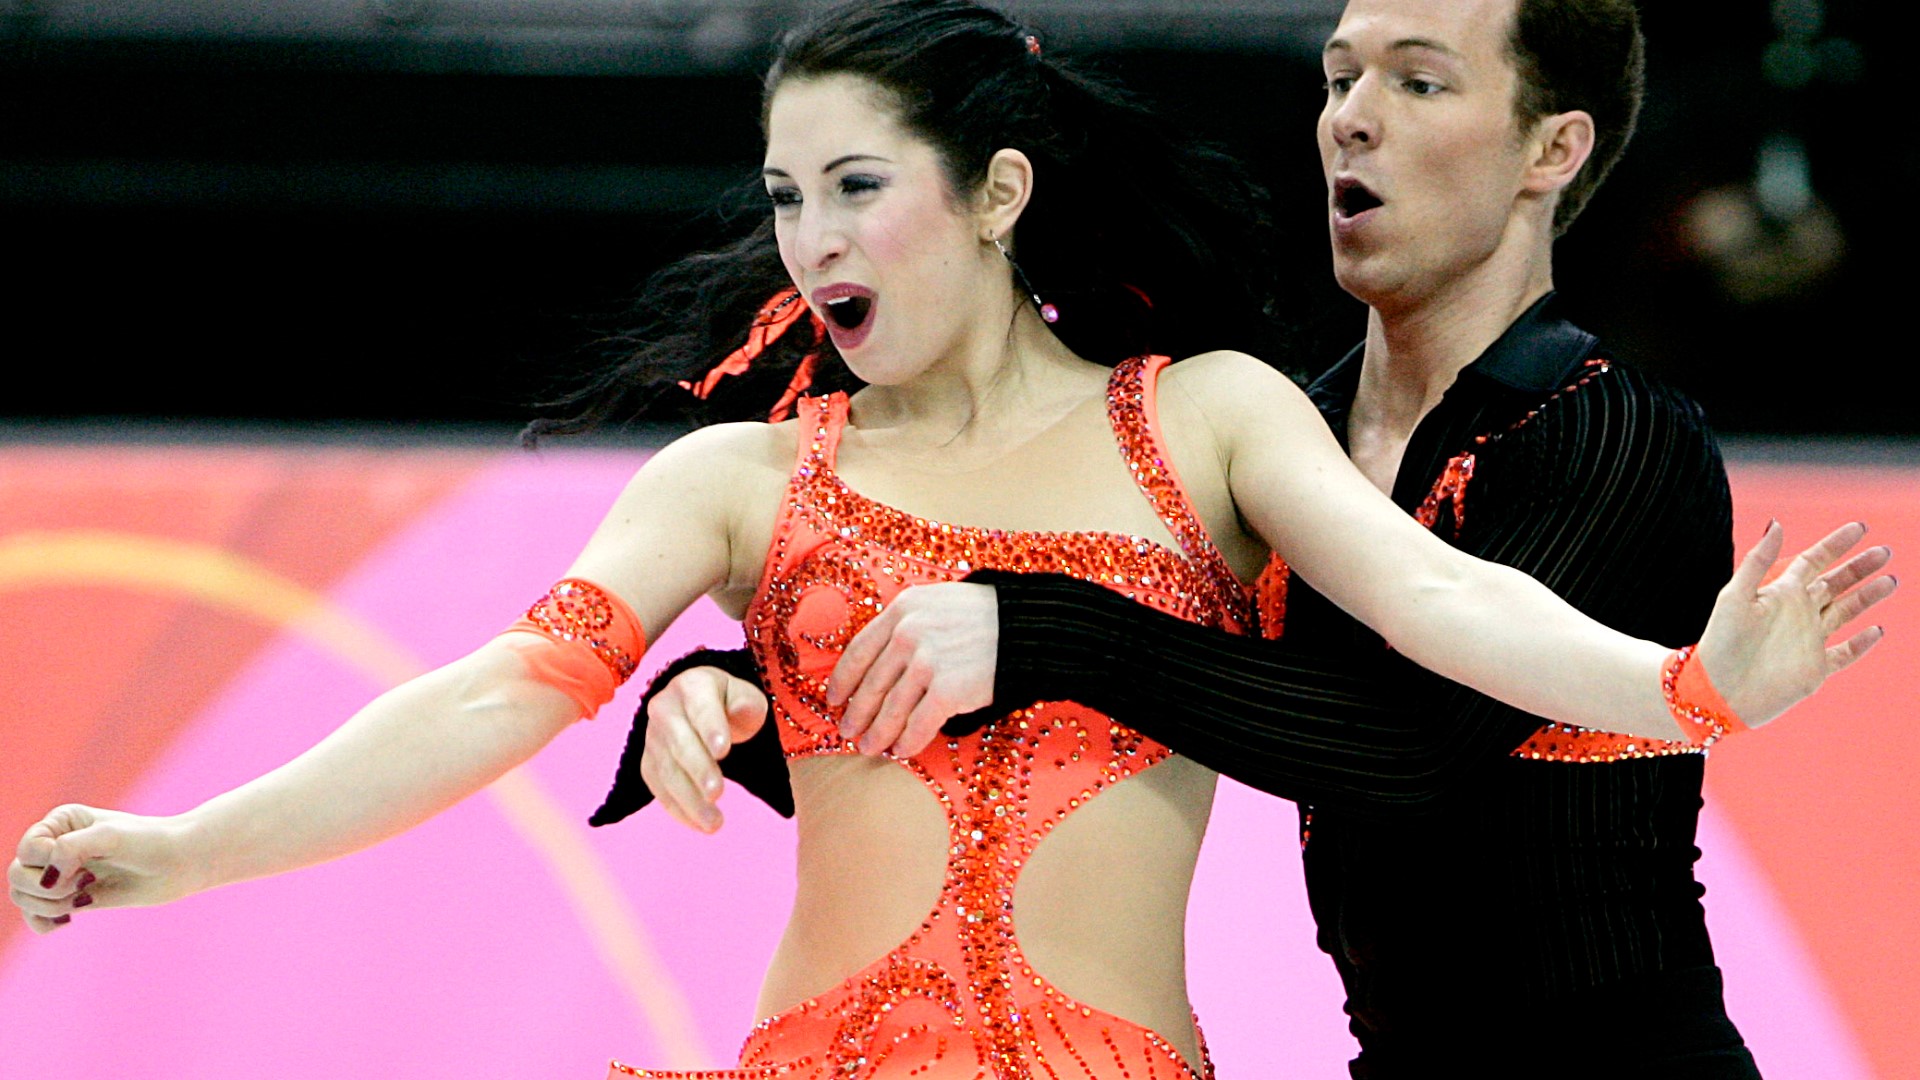 Jamie Silverstein competed for Team USA during the 2006 Torino Games. Now she is a mom and teaches ice dancing at Mountain View Ice Arena in Vancouver.